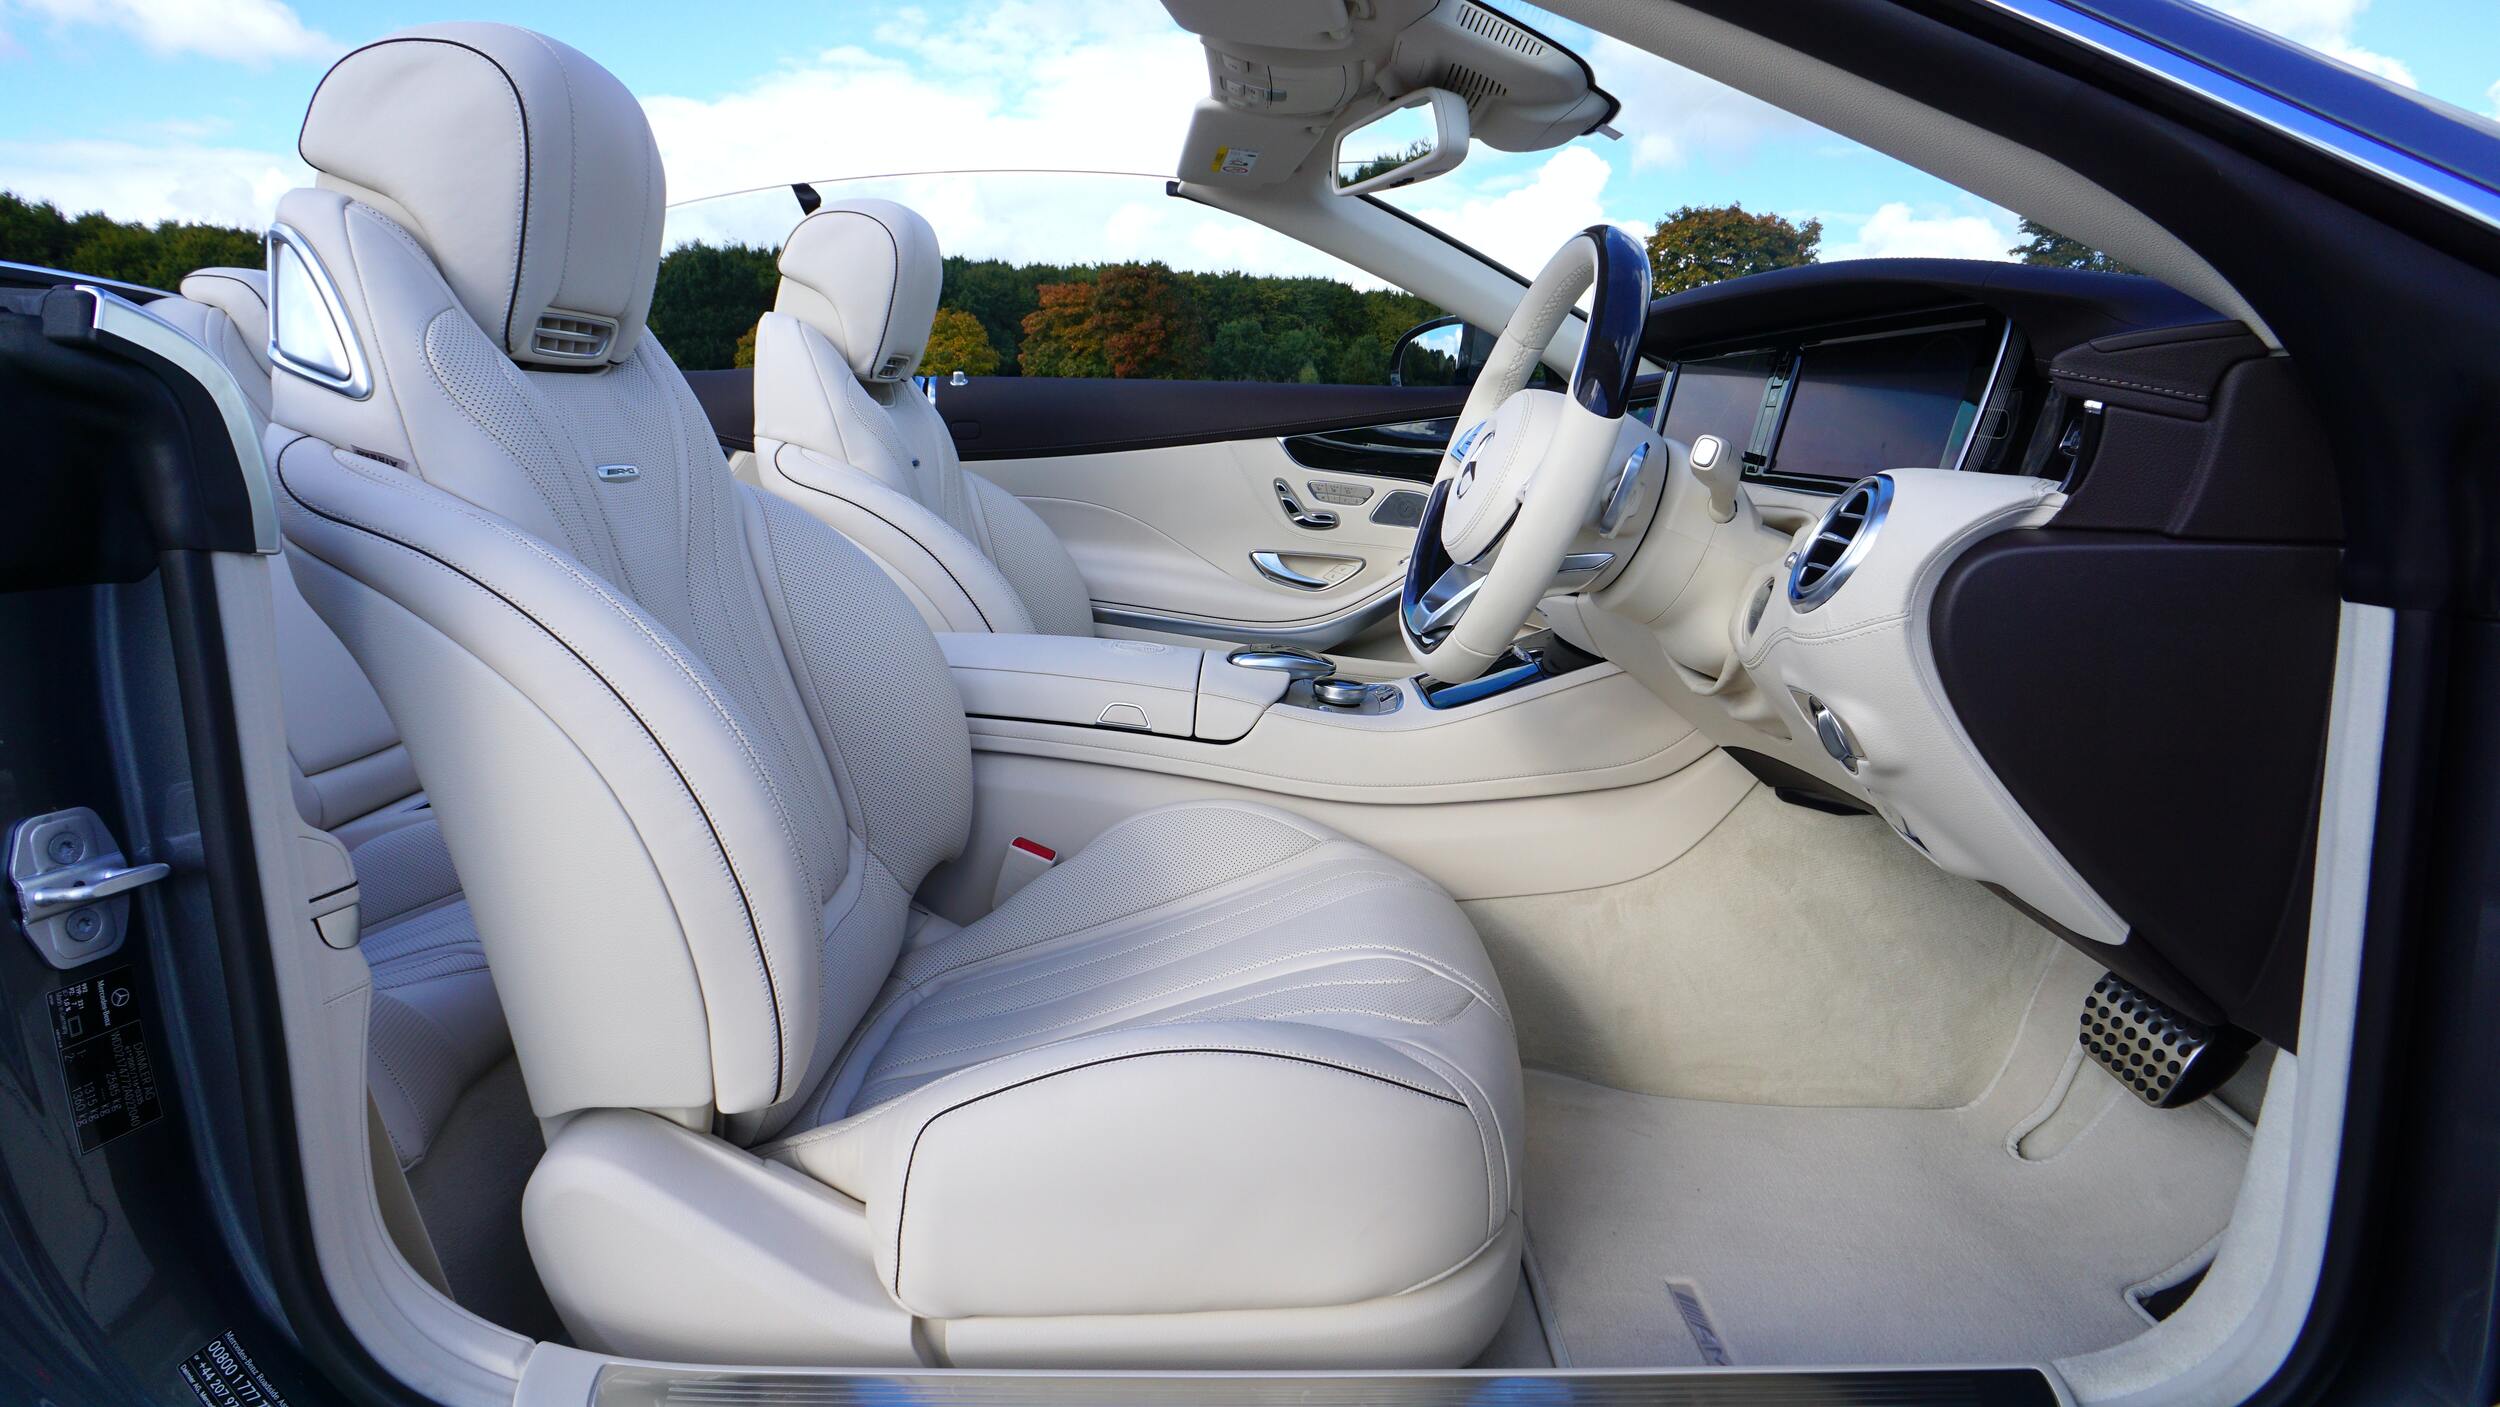 How hard is it to keep white leather car seats clean